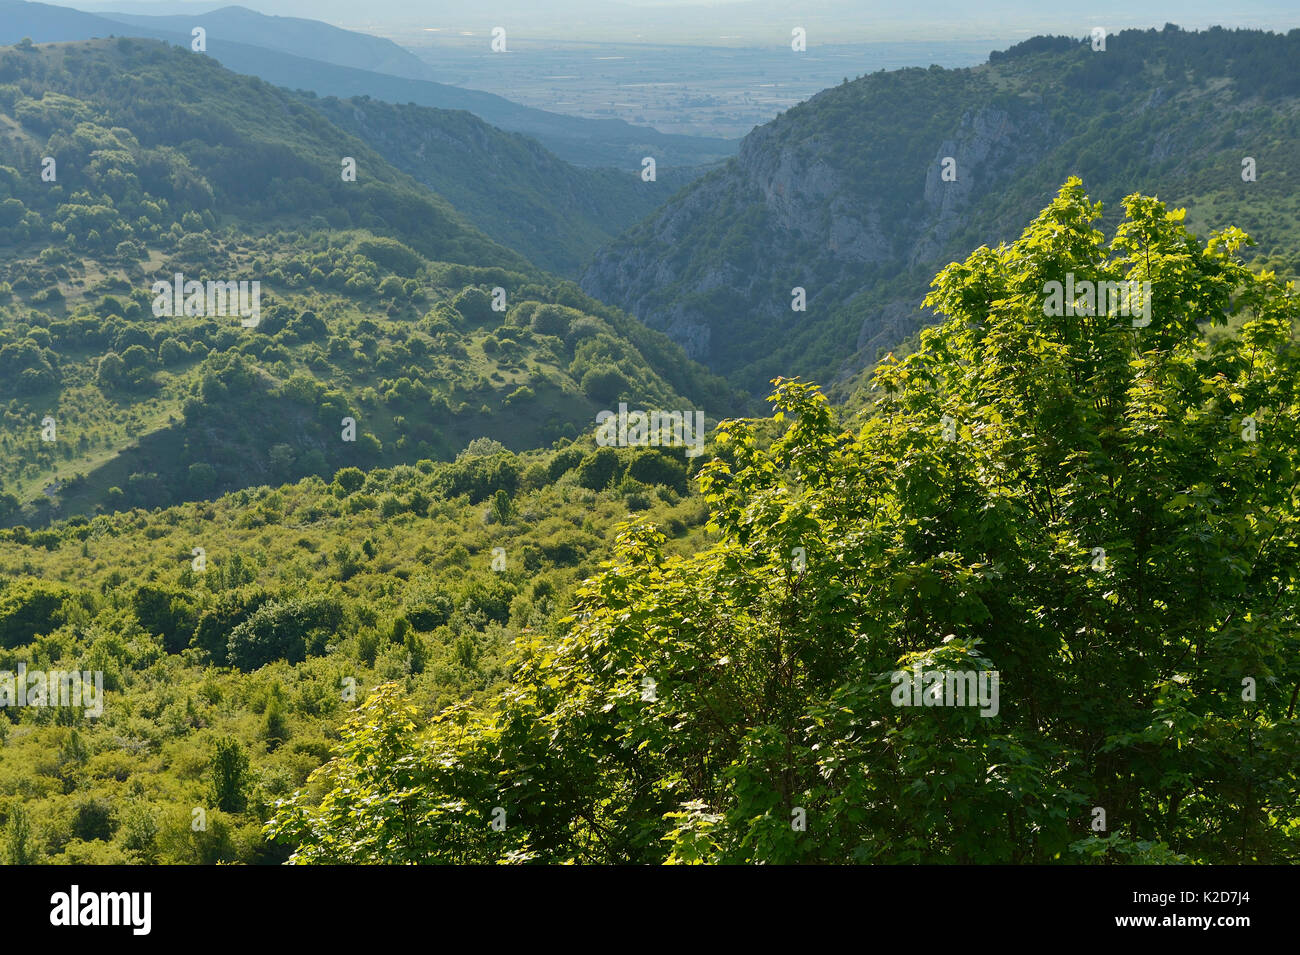 Abandoned grazing land, now part of Central Apennines Rewilding Area, Lazio e Molise National Park, Abruzzo, Italy, June 2014. Stock Photo